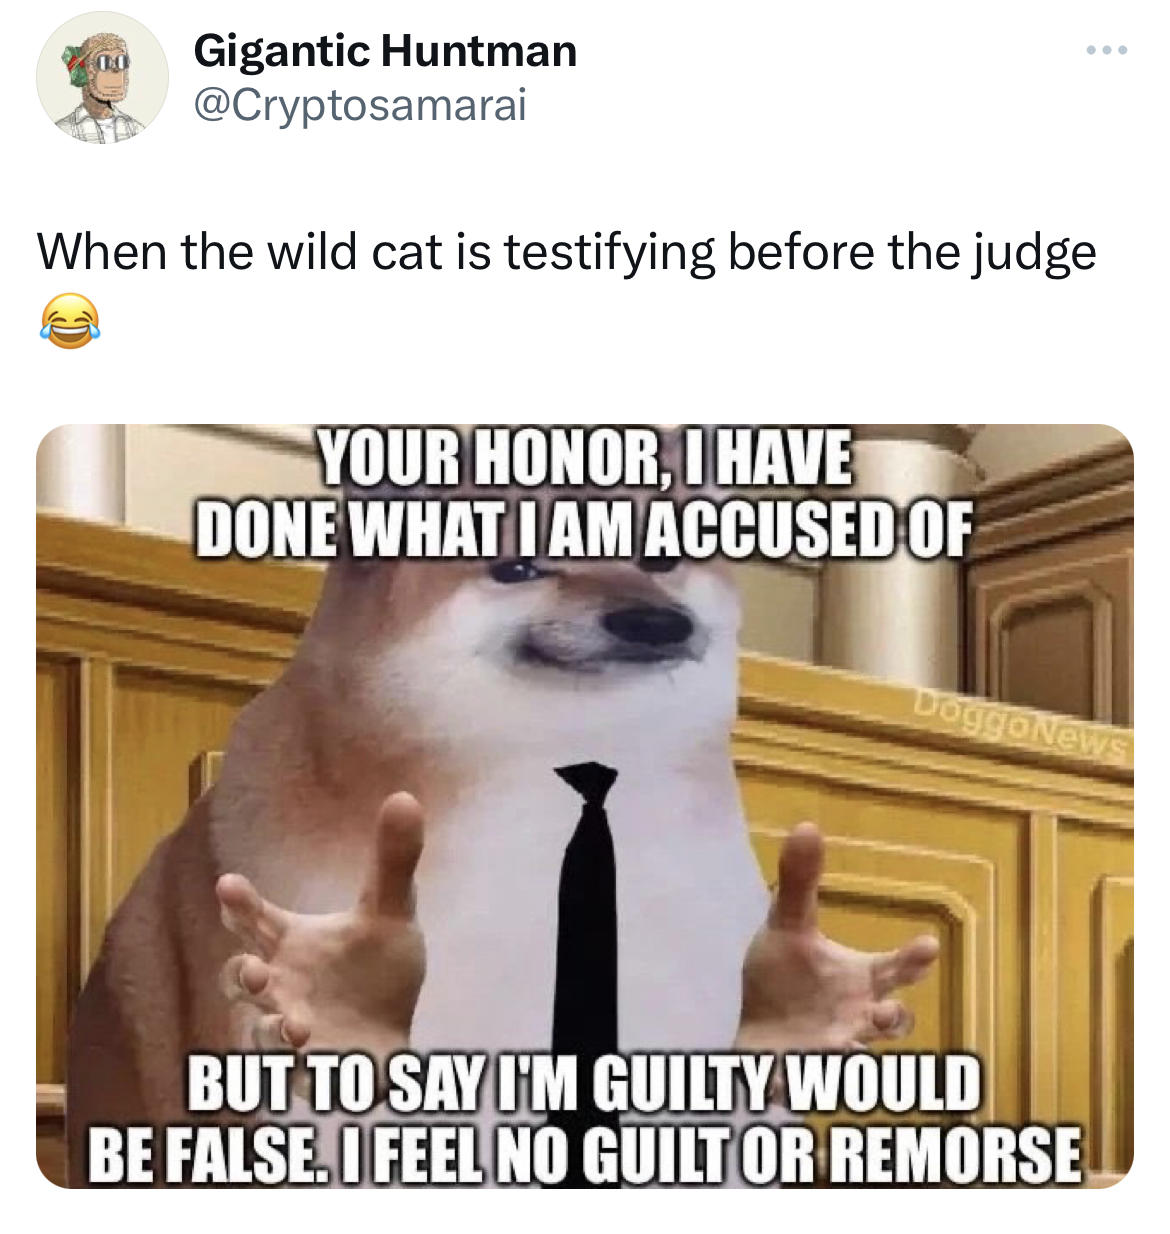 Ohio Cocaine Cat memes - harry potter macros - Gigantic Huntman When the wild cat is testifying before the judge Your Honor, I Have Done What I Am Accused Of DoggoNews But To Say I'M Guilty Would Be False. I Feel No Guilt Or Remorse